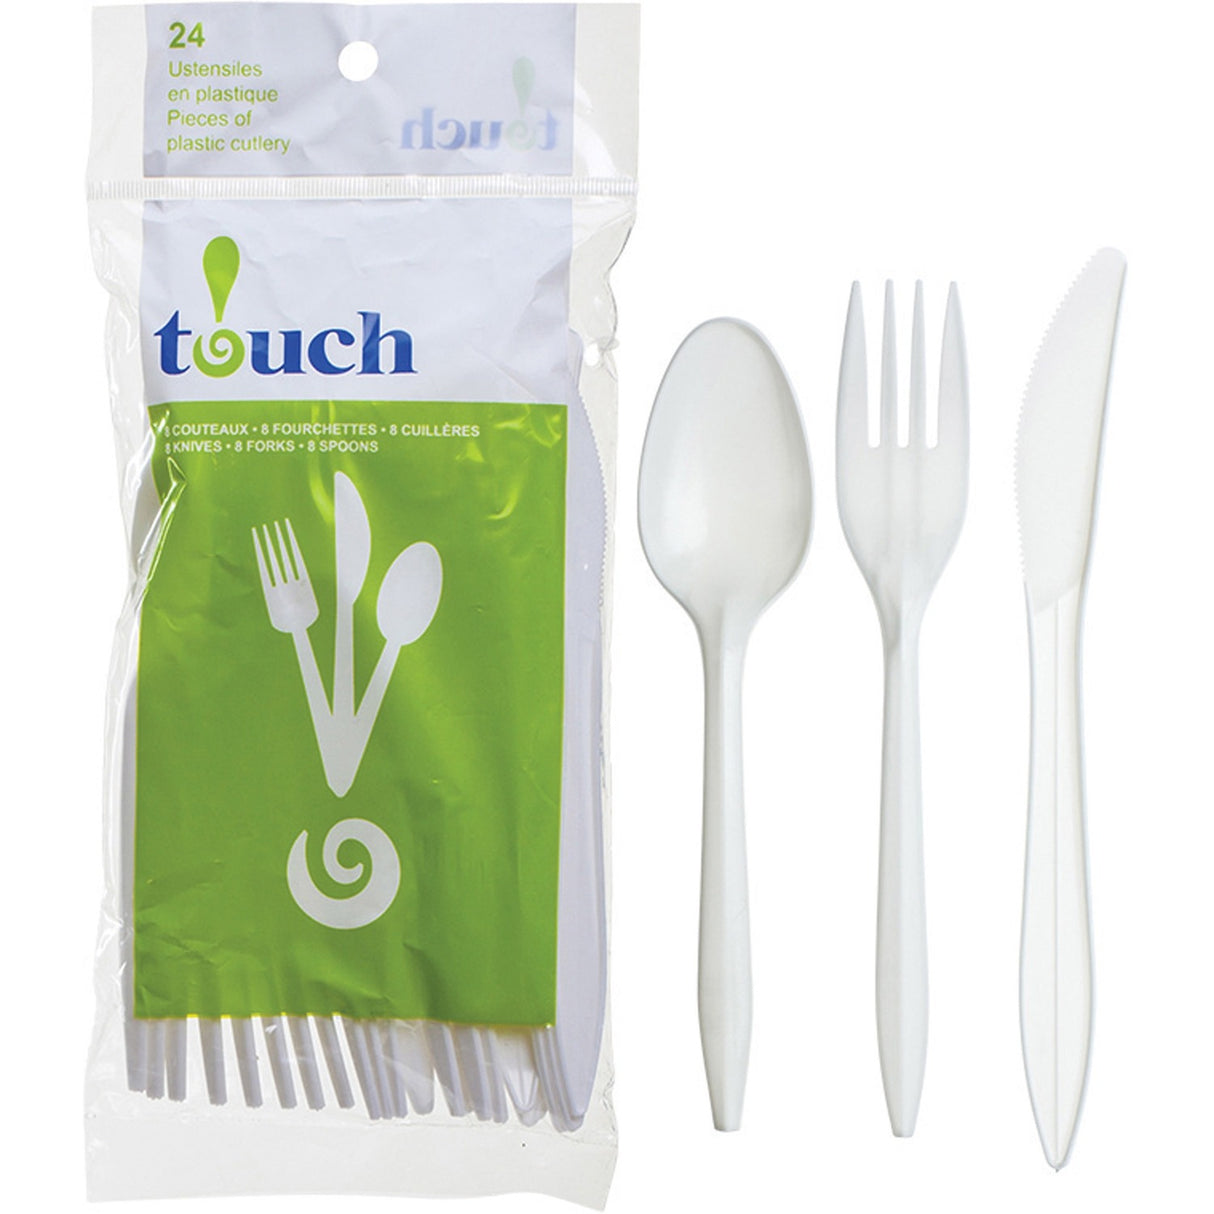 TOUCH Plastic Cutlery Set